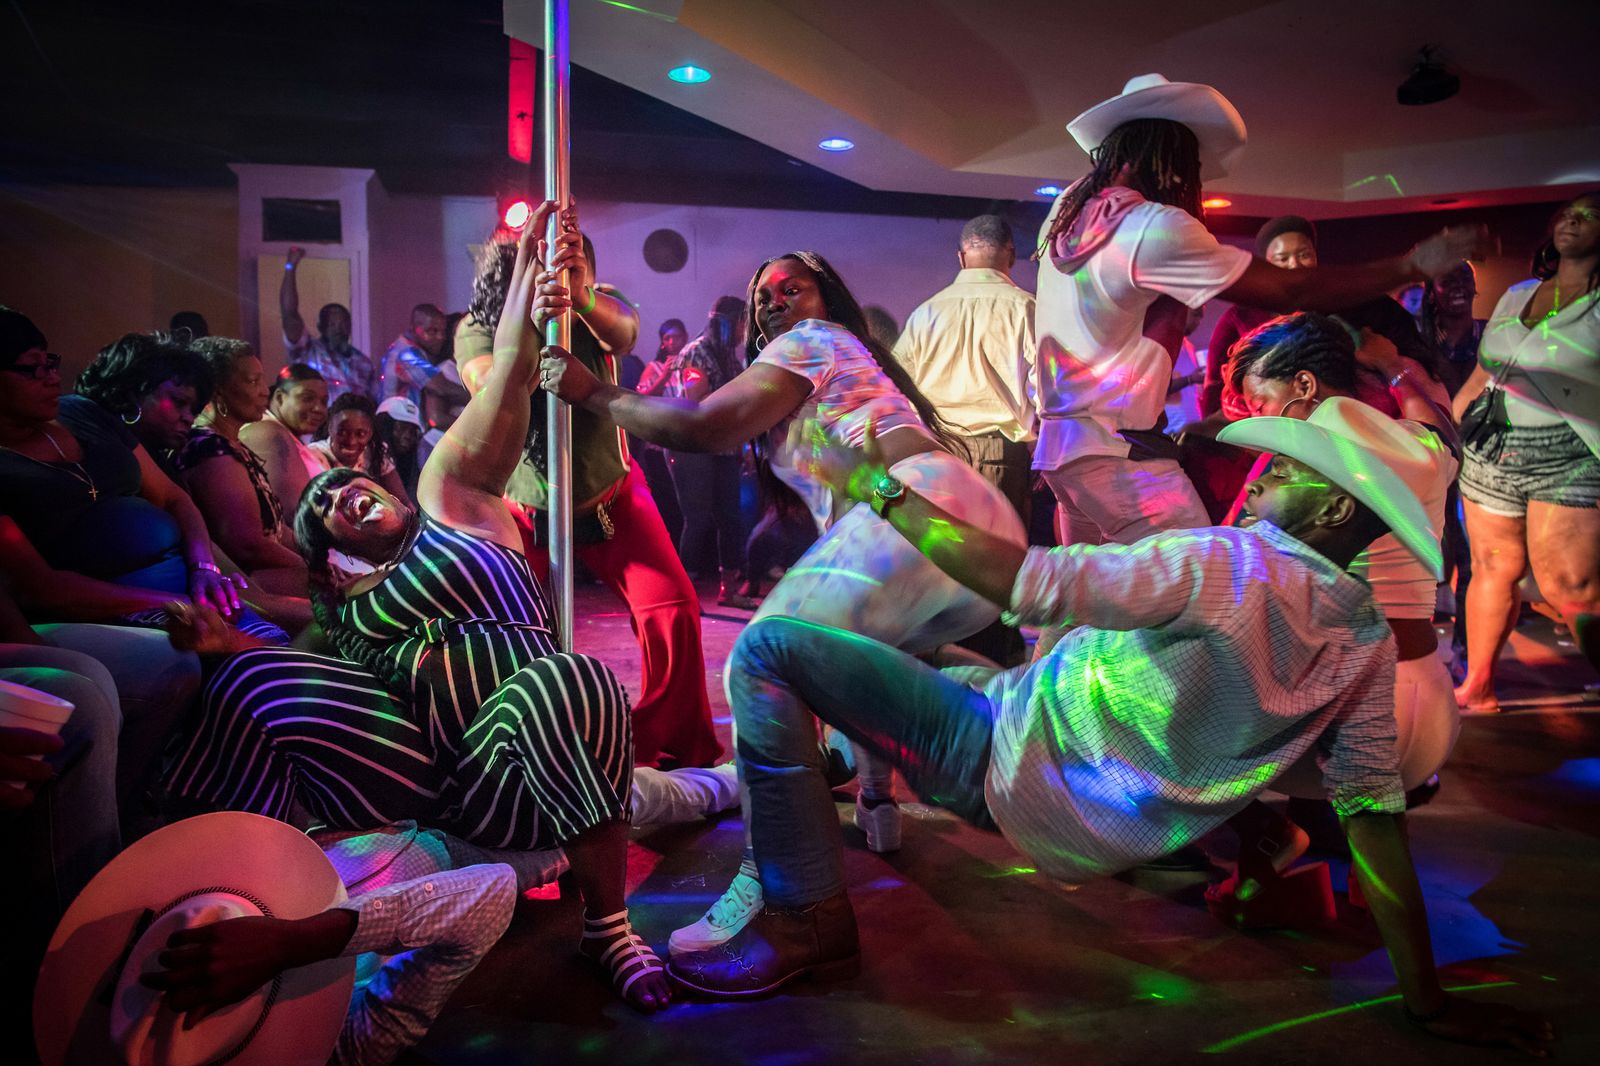 © Rory Doyle - A group of cowboys take to the dance floor at Club Black Castle in Ruleville, Mississippi on Sept. 3, 2018.